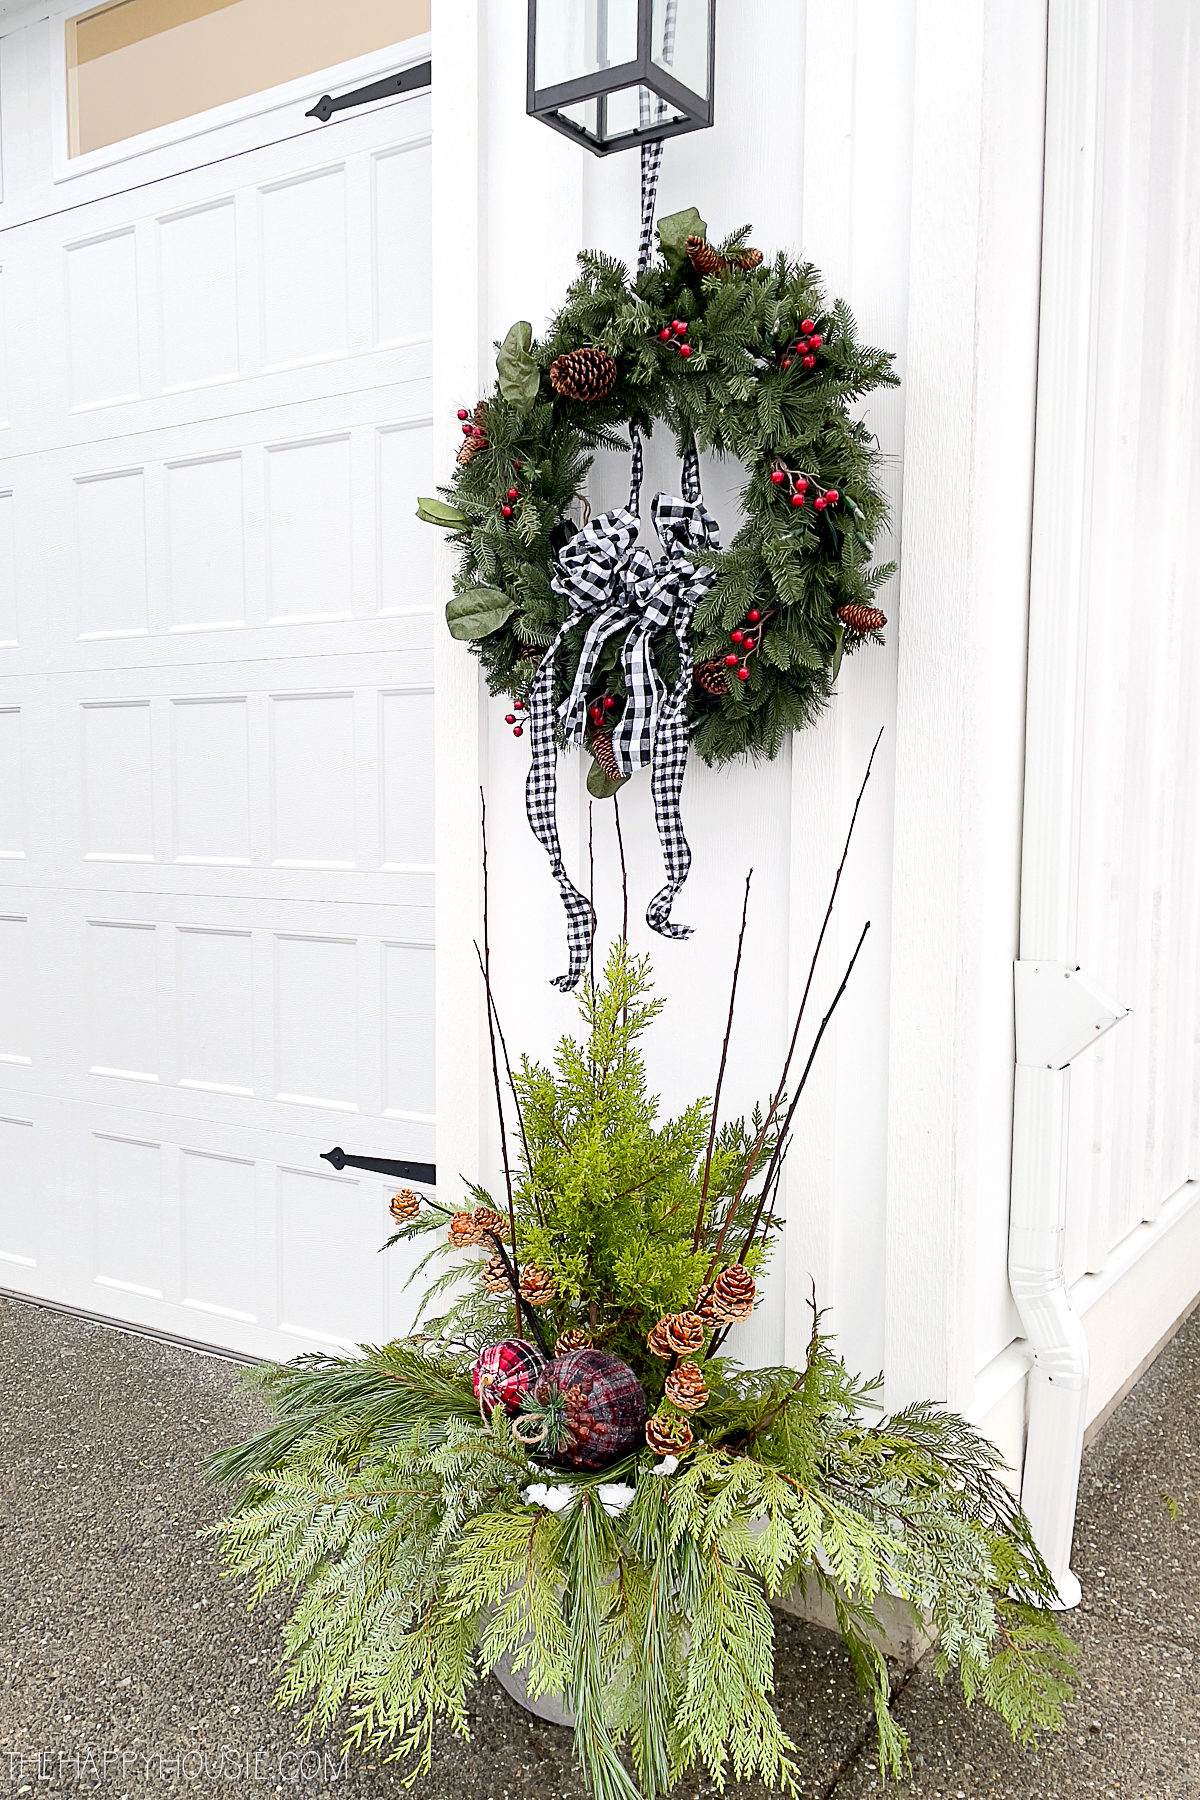 the side of a garage door decorated with Christmas greens and a wreath